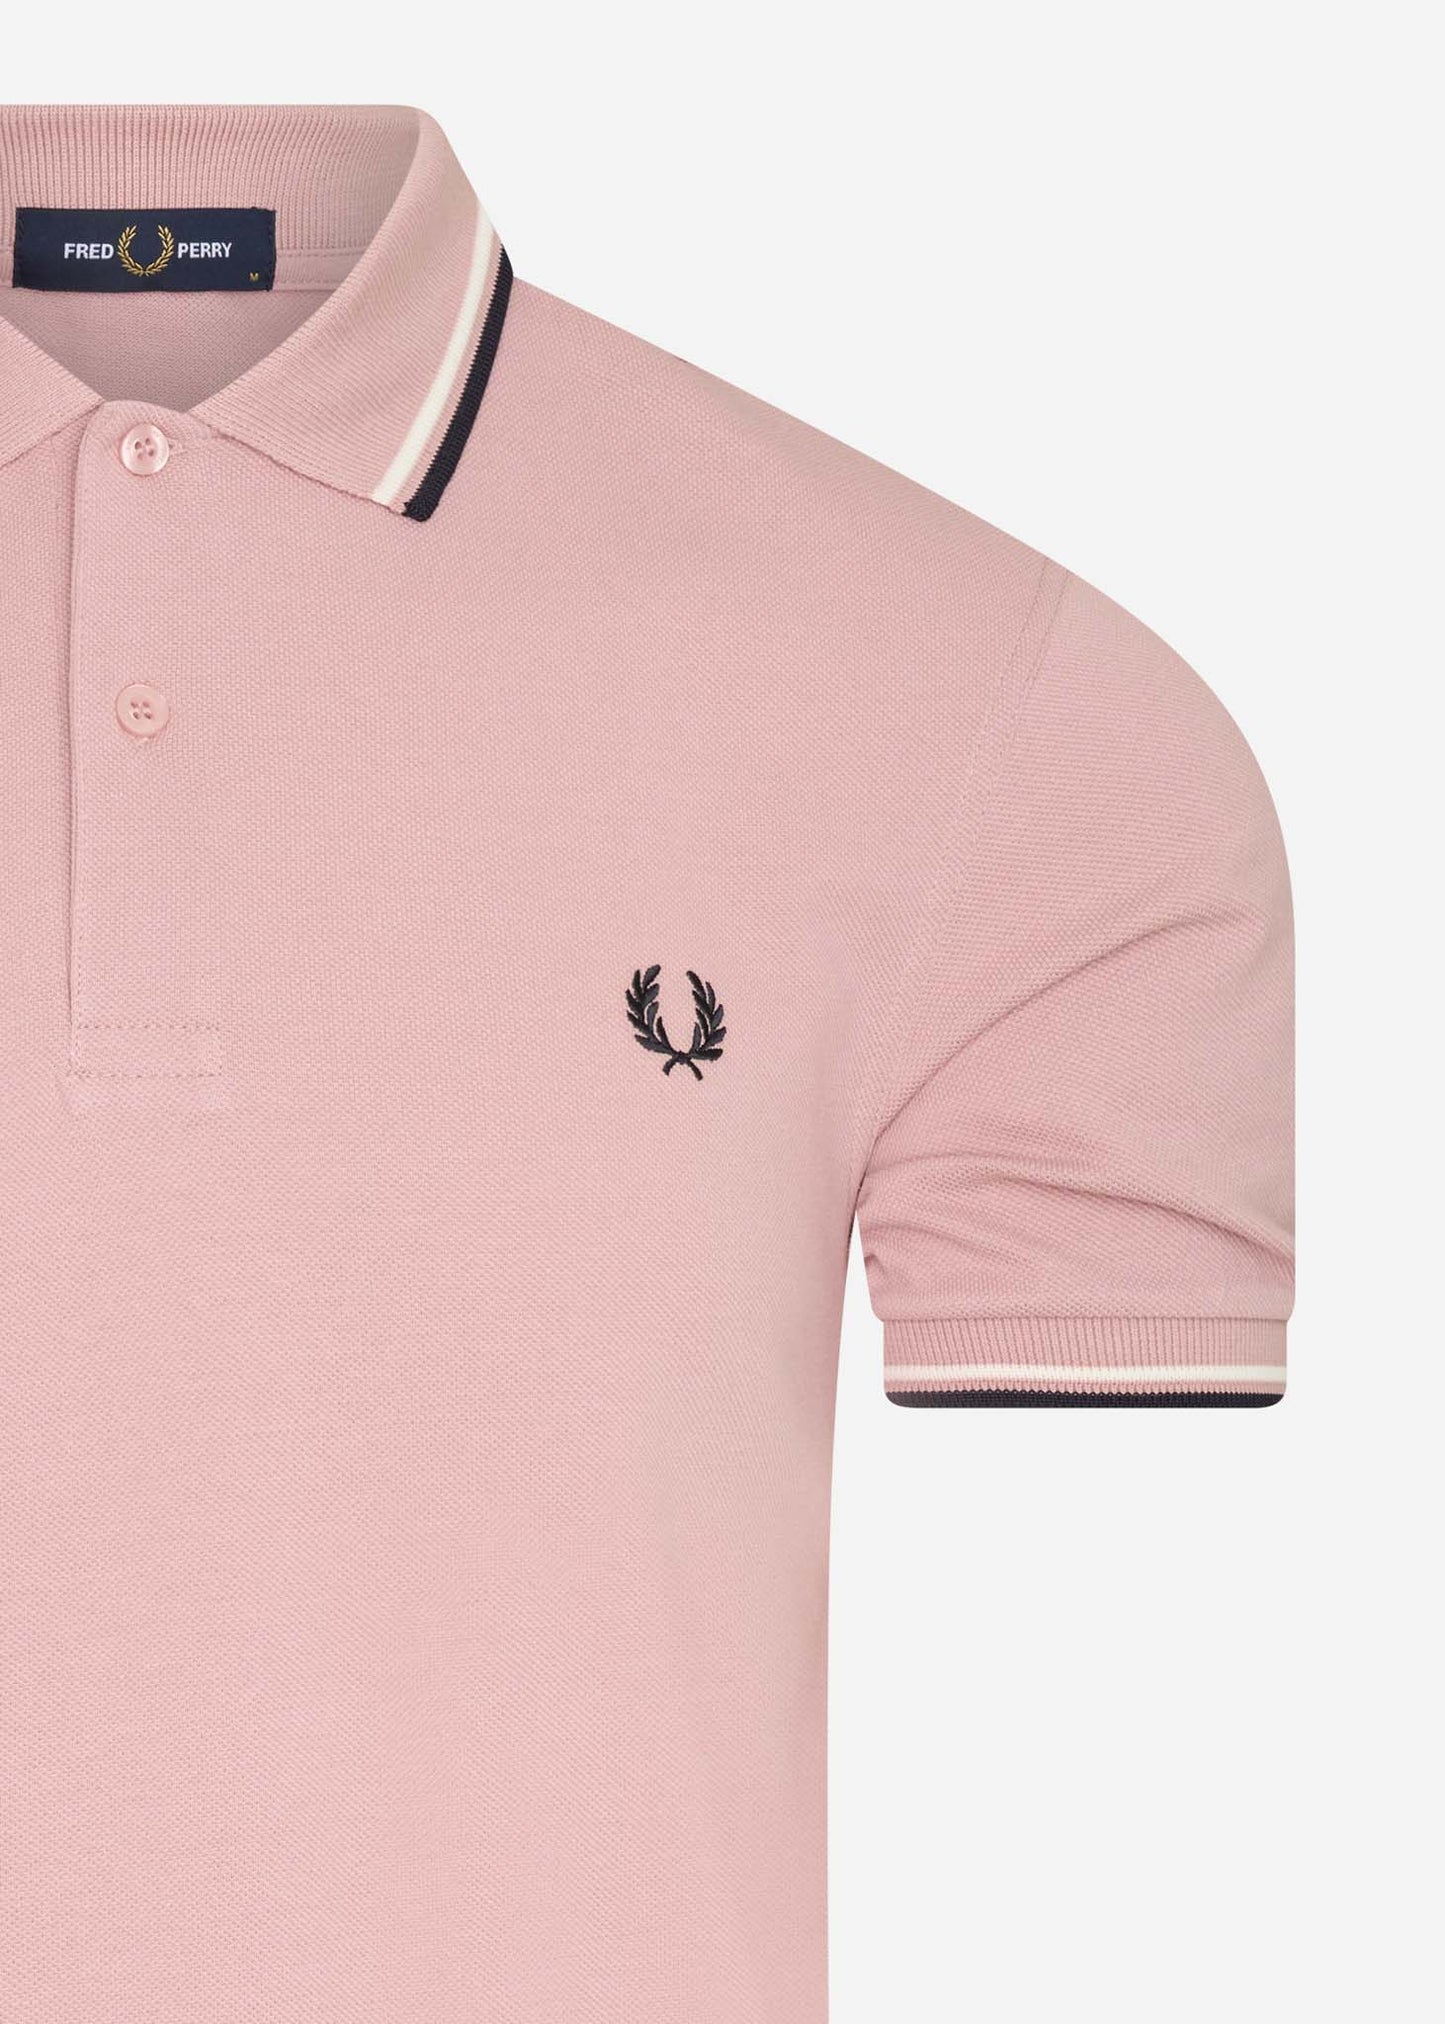 Twin tipped fred perry shirt - chalky pink